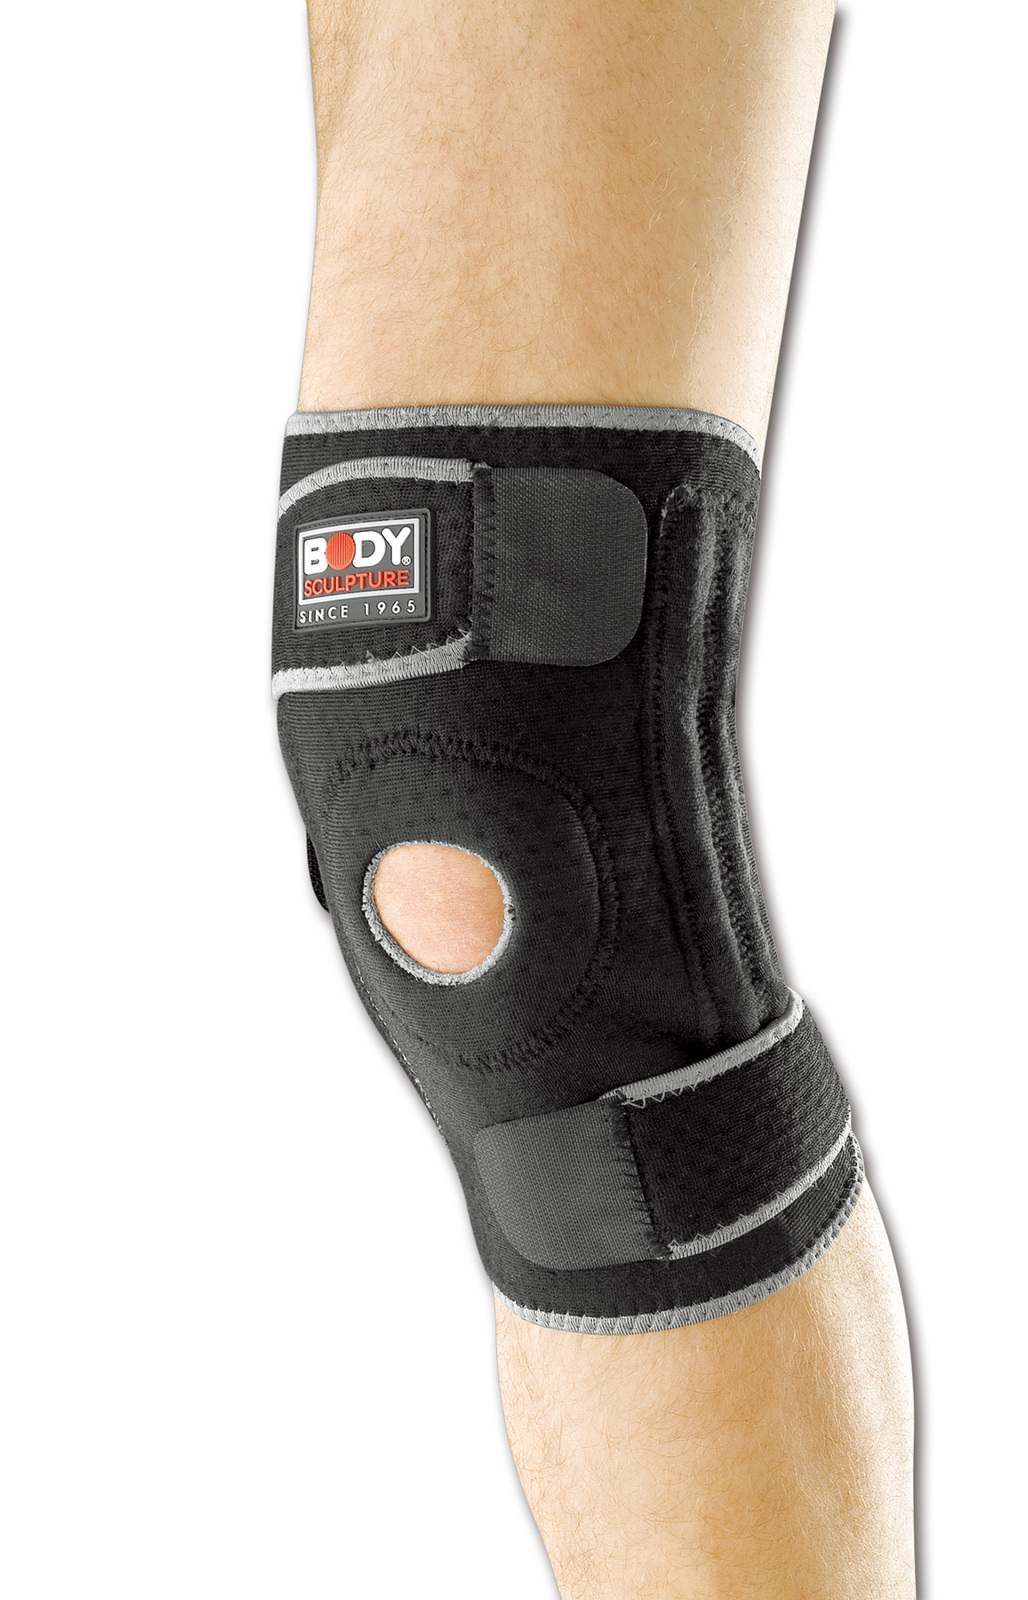 Body Sculpture Knee Support Open Patella Reinforced Sides